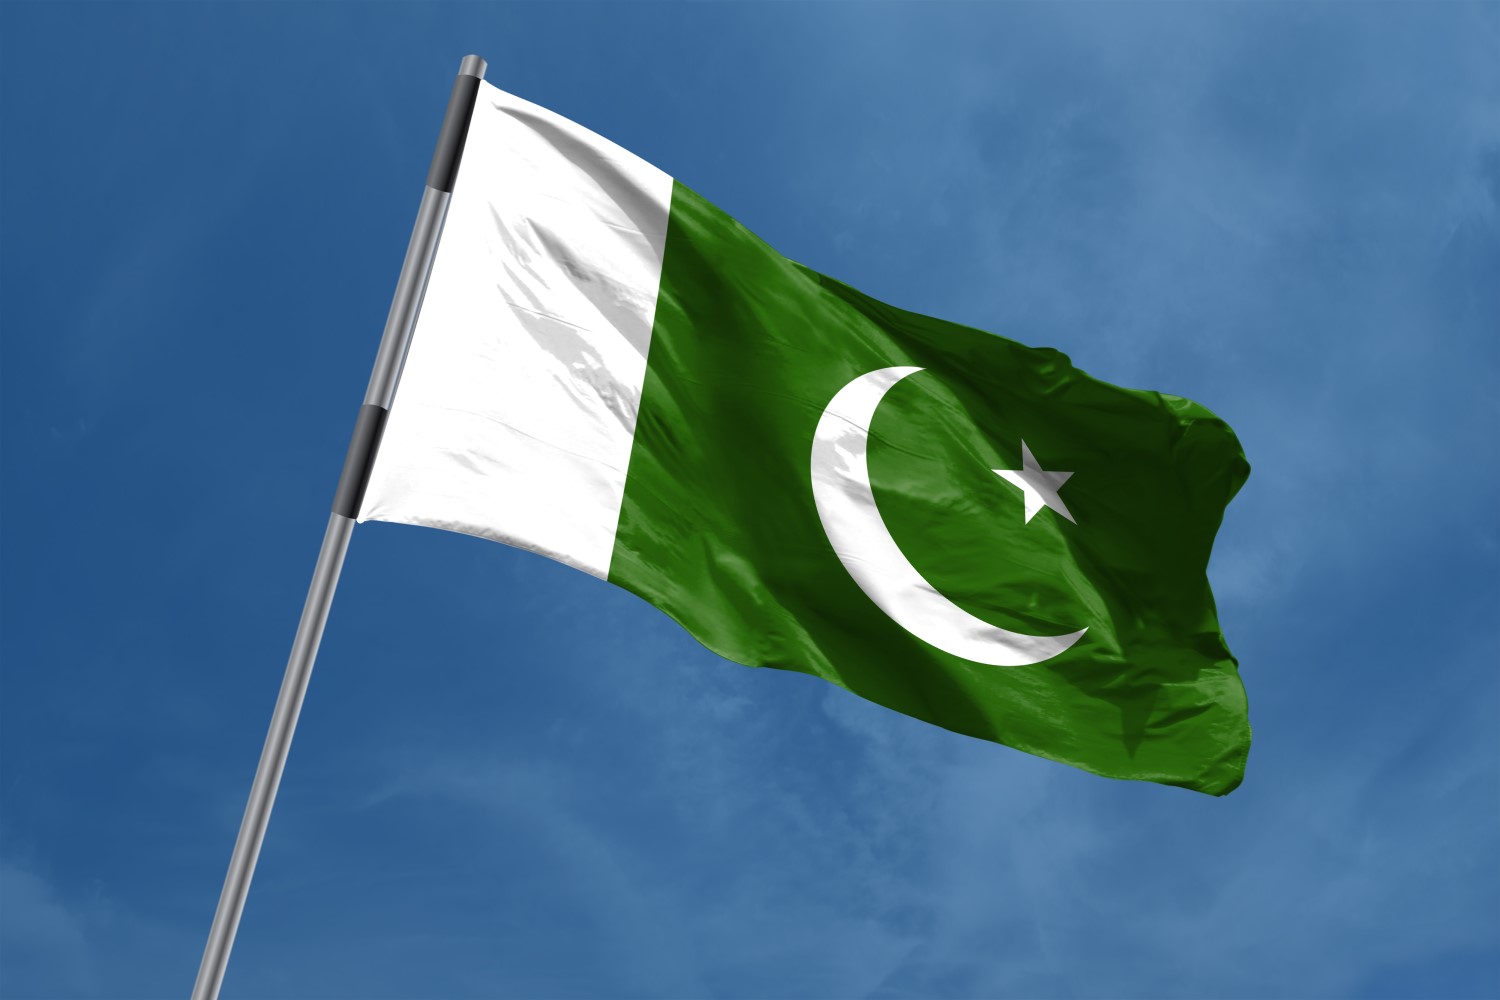 Pakistan’s Investigation Agency Contacts Binance About $100M Scam